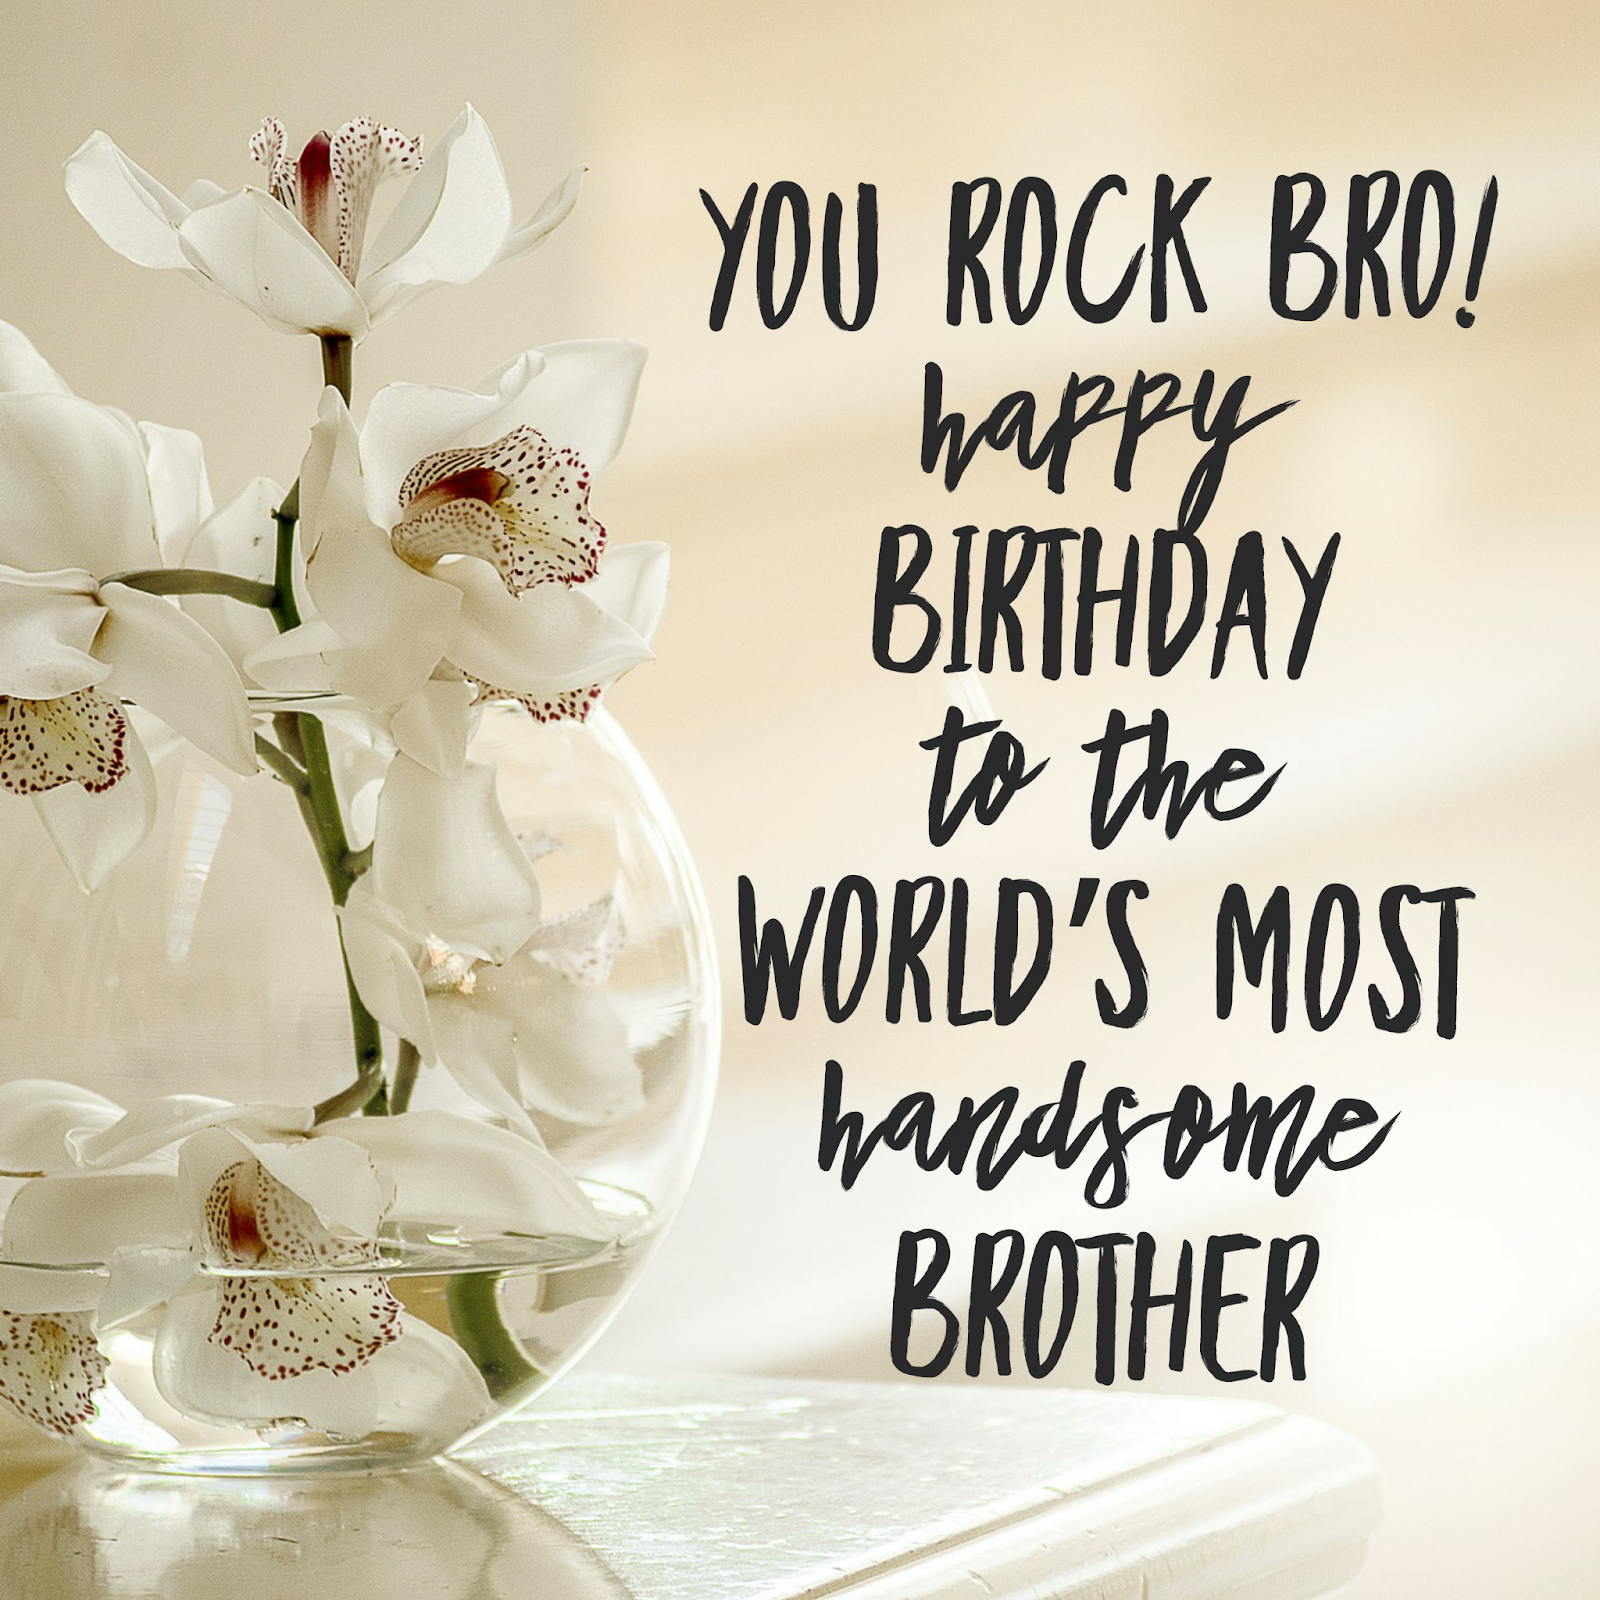 Best Happy Birthday Wishes For Brother - Big Brother Birthday Wishes - HD Wallpaper 